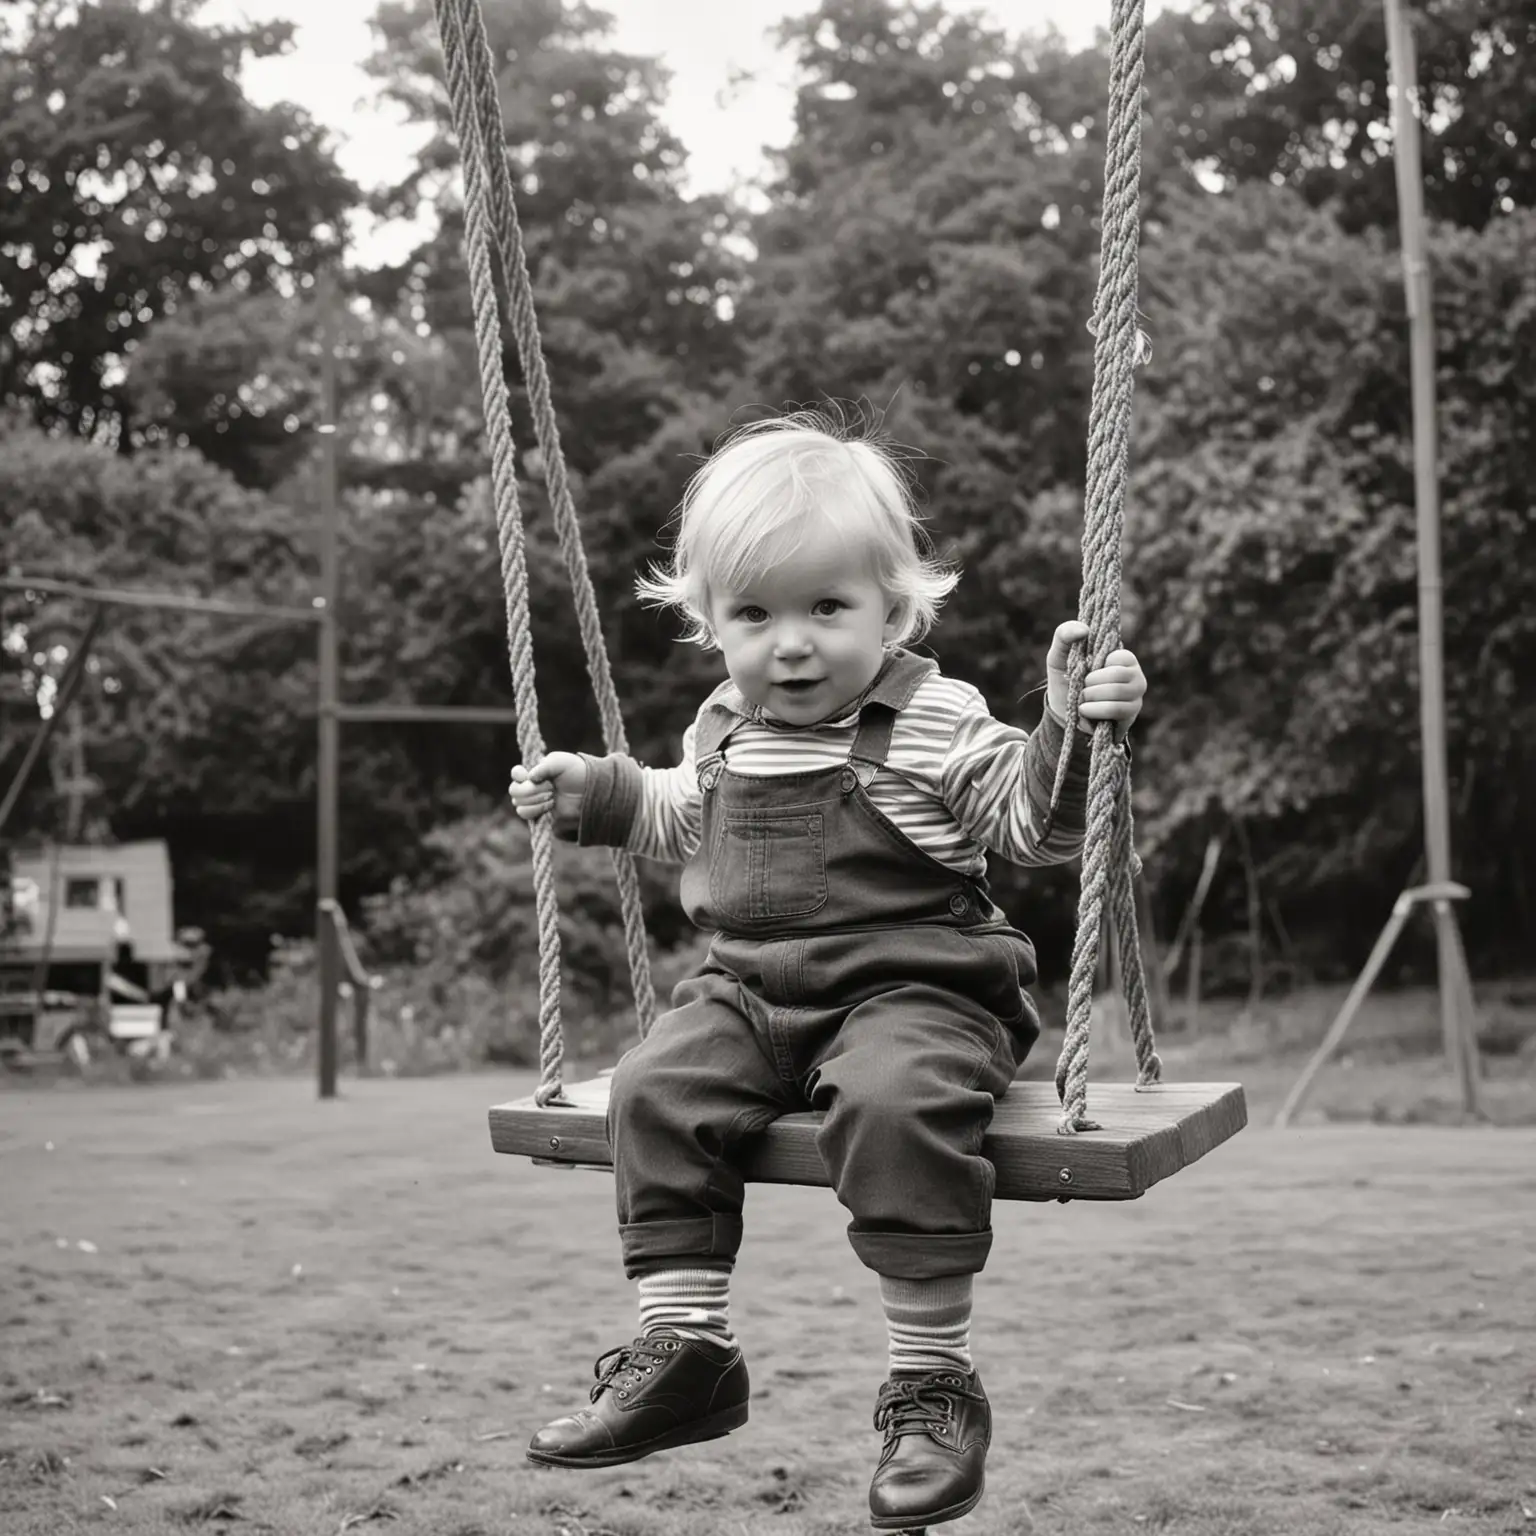 A very old black and white photo of a blond toddler sitting on the giant swing. He is wearing long dark trousers with socks in the style of an old photograph.